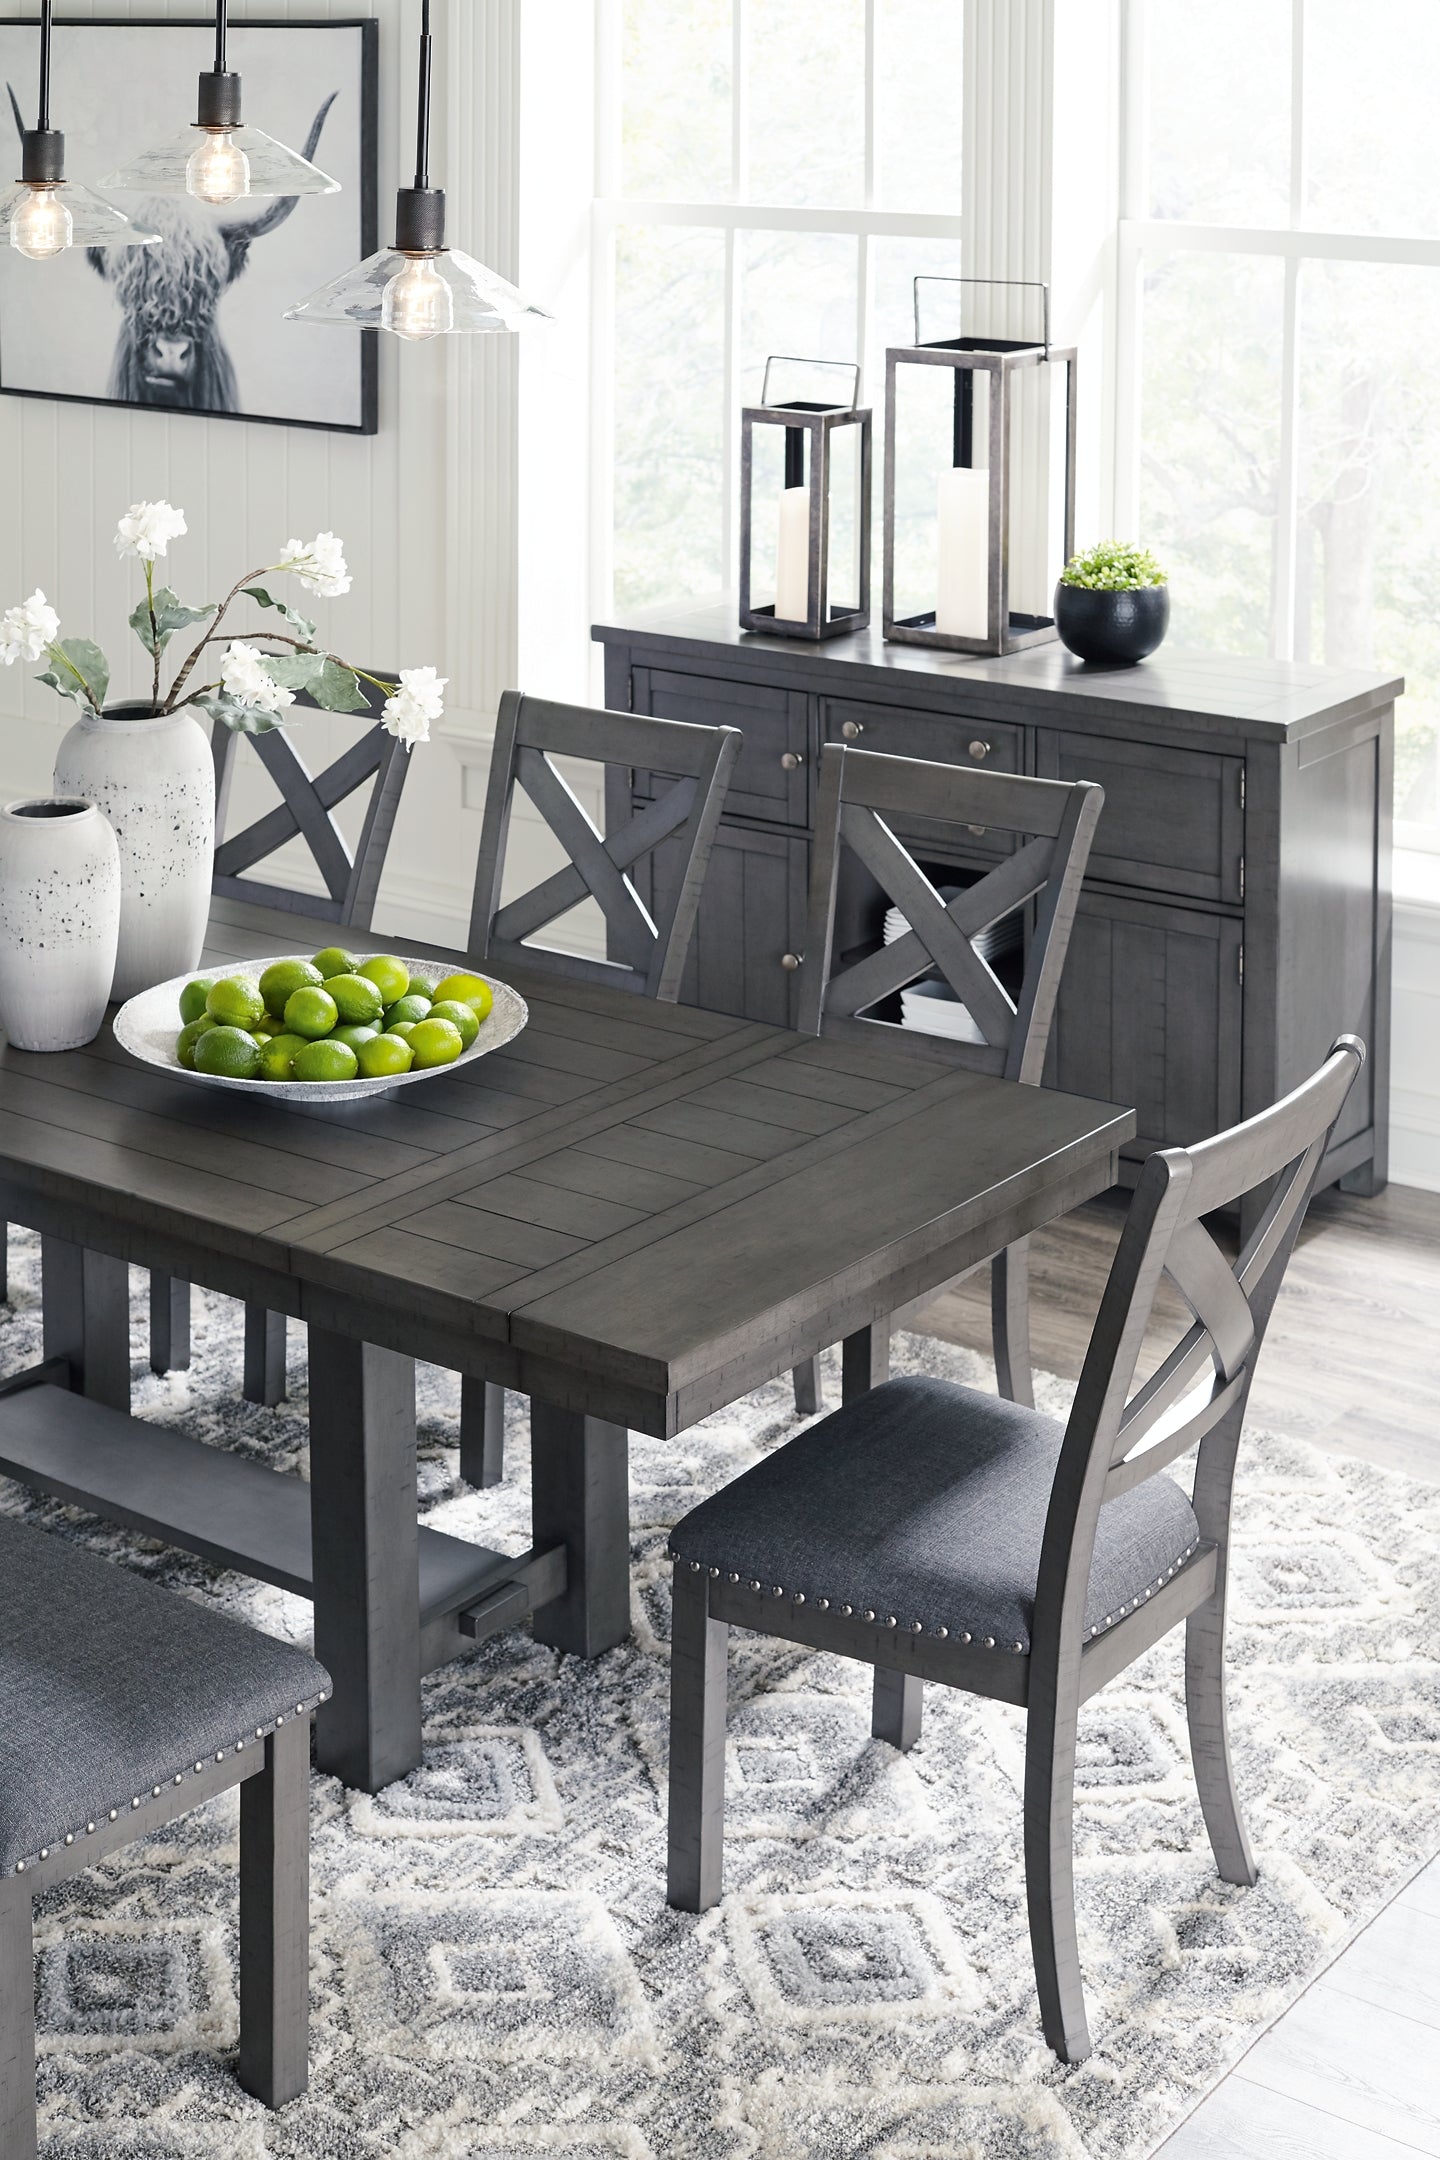 Myshanna Dining Table and 8 Chairs with Storage Wilson Furniture (OH)  in Bridgeport, Ohio. Serving Bridgeport, Yorkville, Bellaire, & Avondale